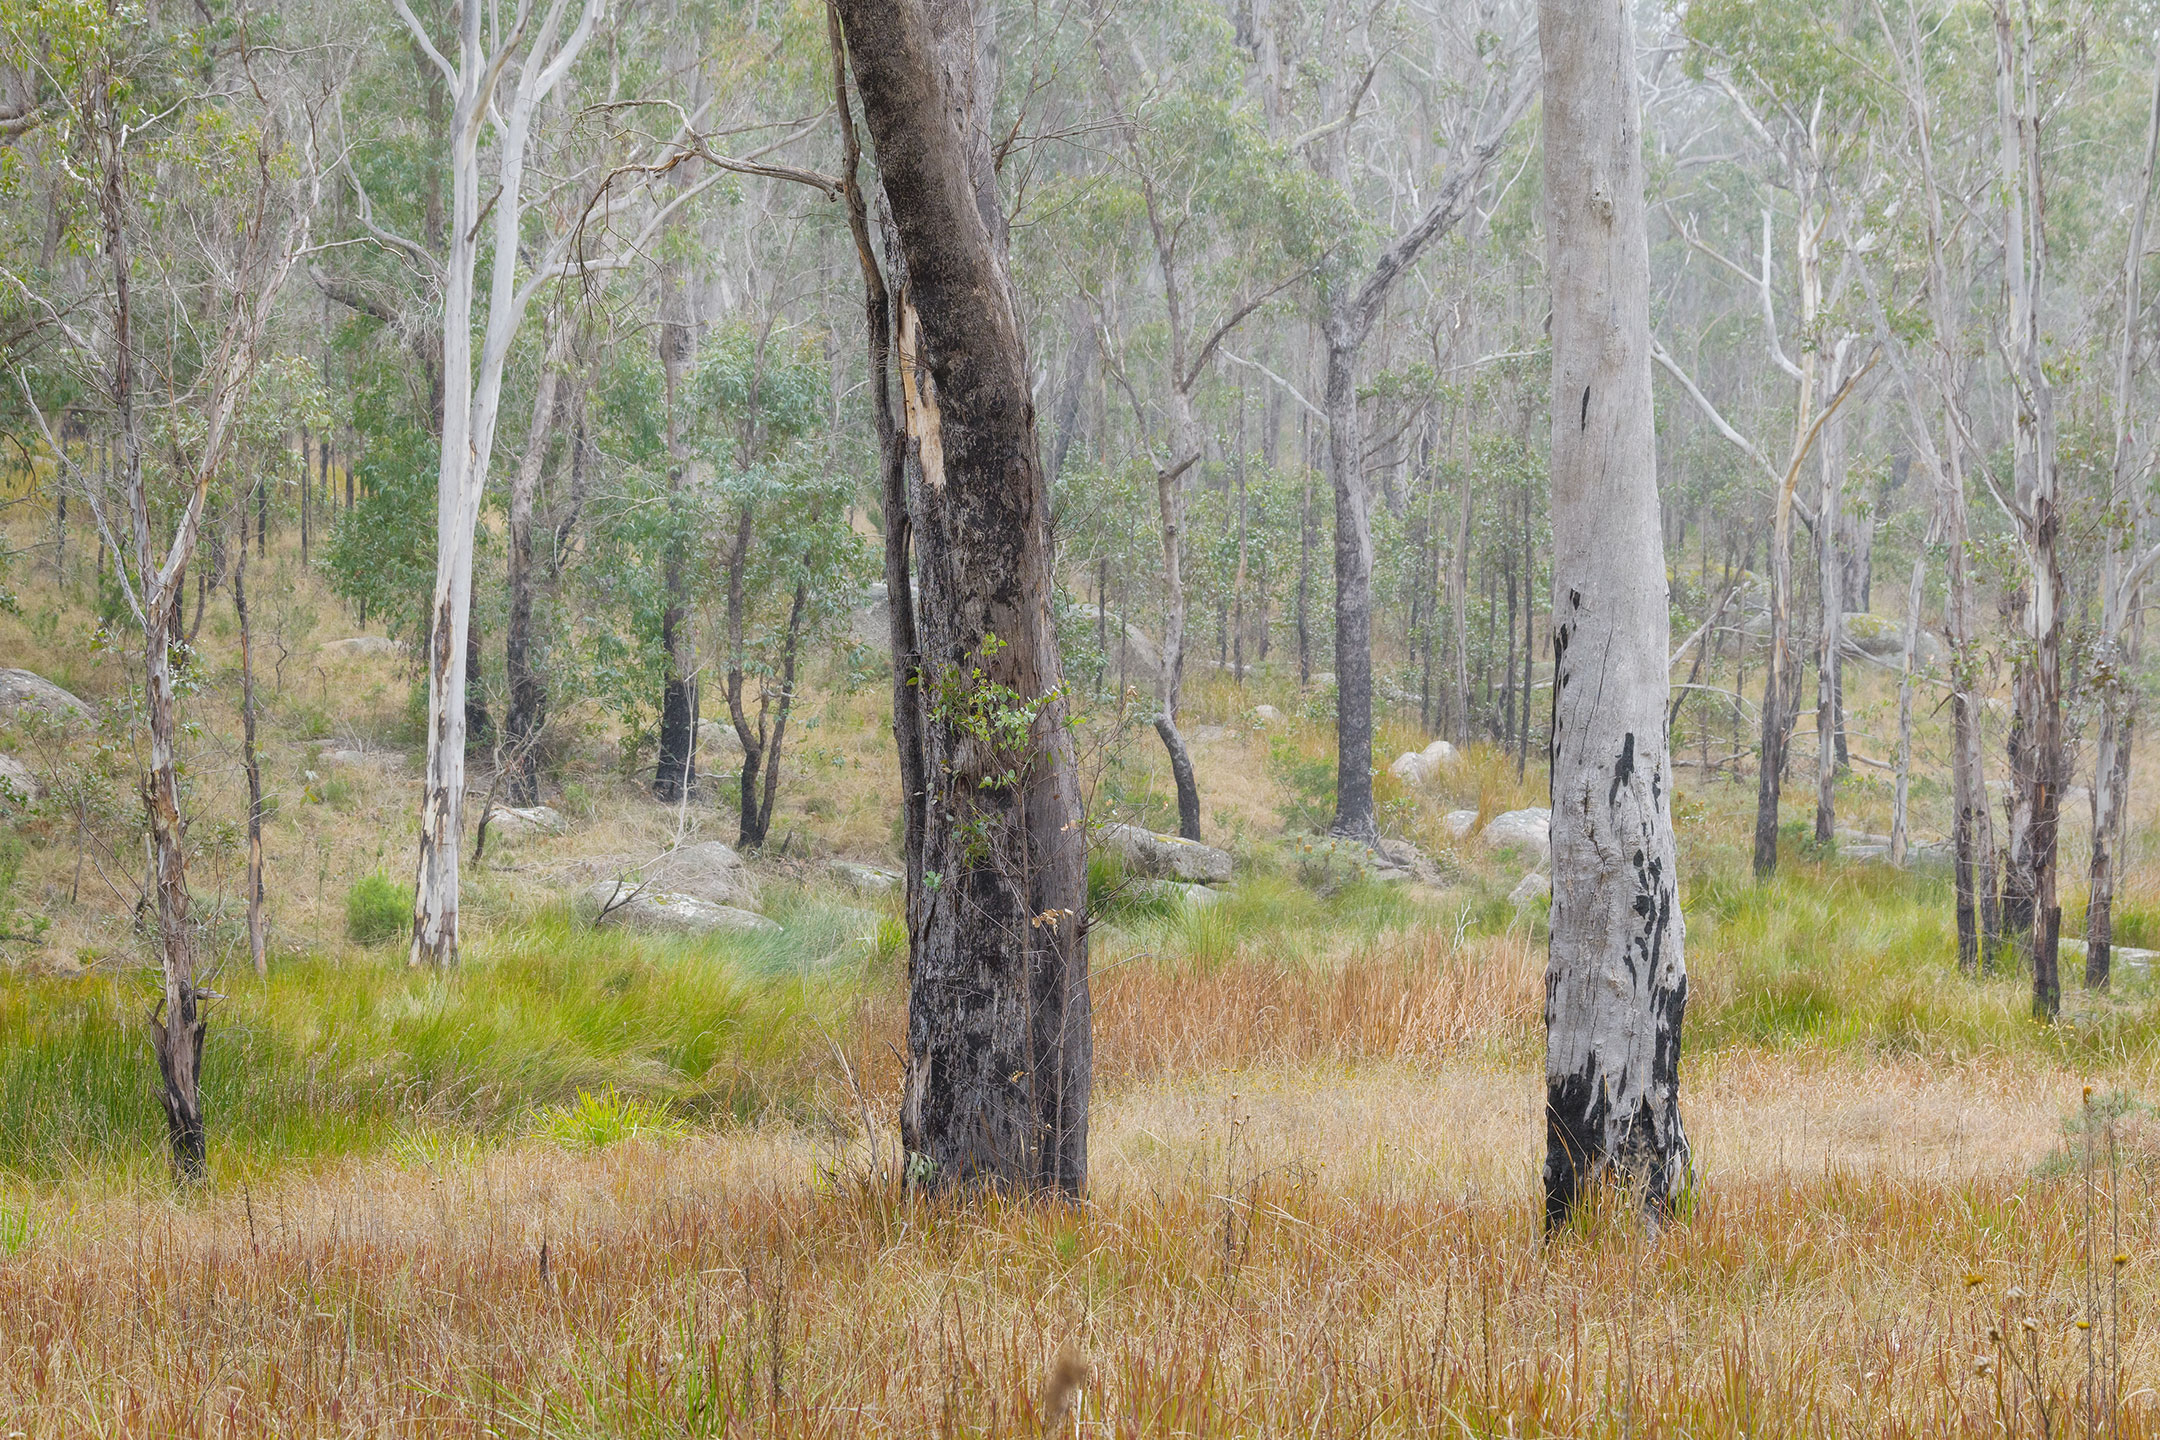 Mist spreads through open bushland in the Australian outback of Bald Rock National Park